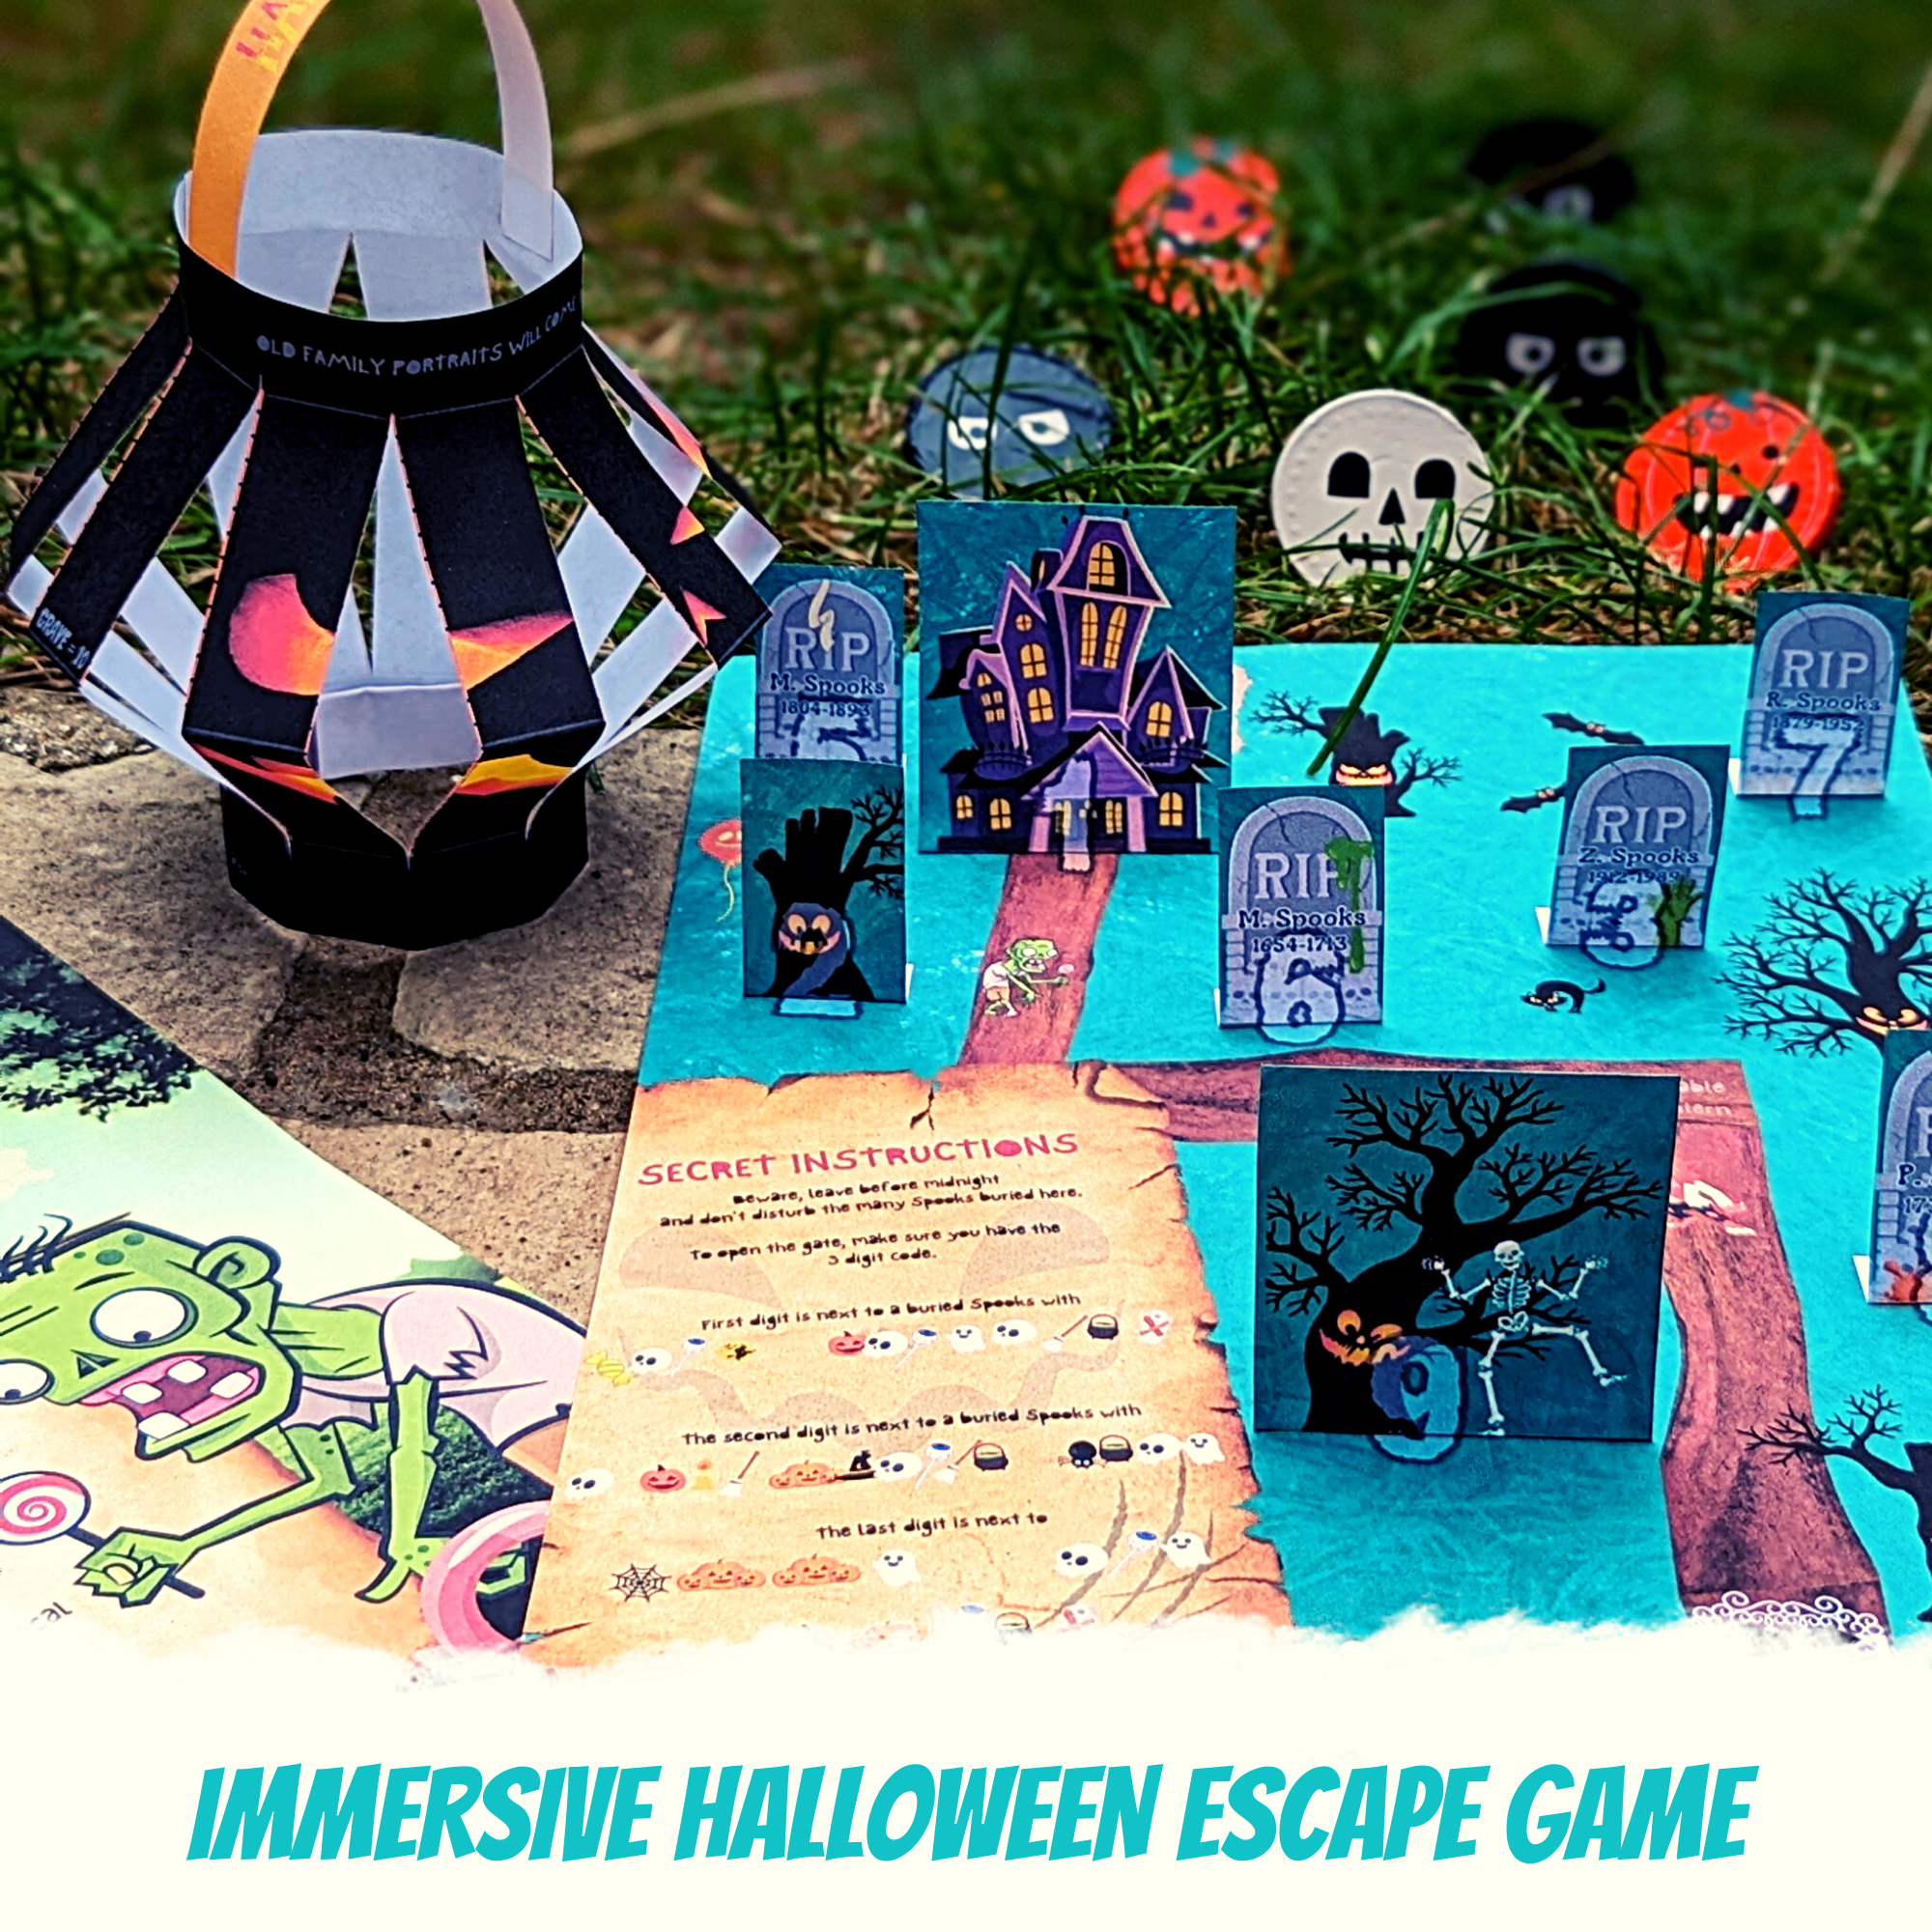 Escape Room Game kit for kids perfect for children birthday parties : Great Halloween Escape. Home family spooky trick or treat activity - RIP zombie cemetery puzzle